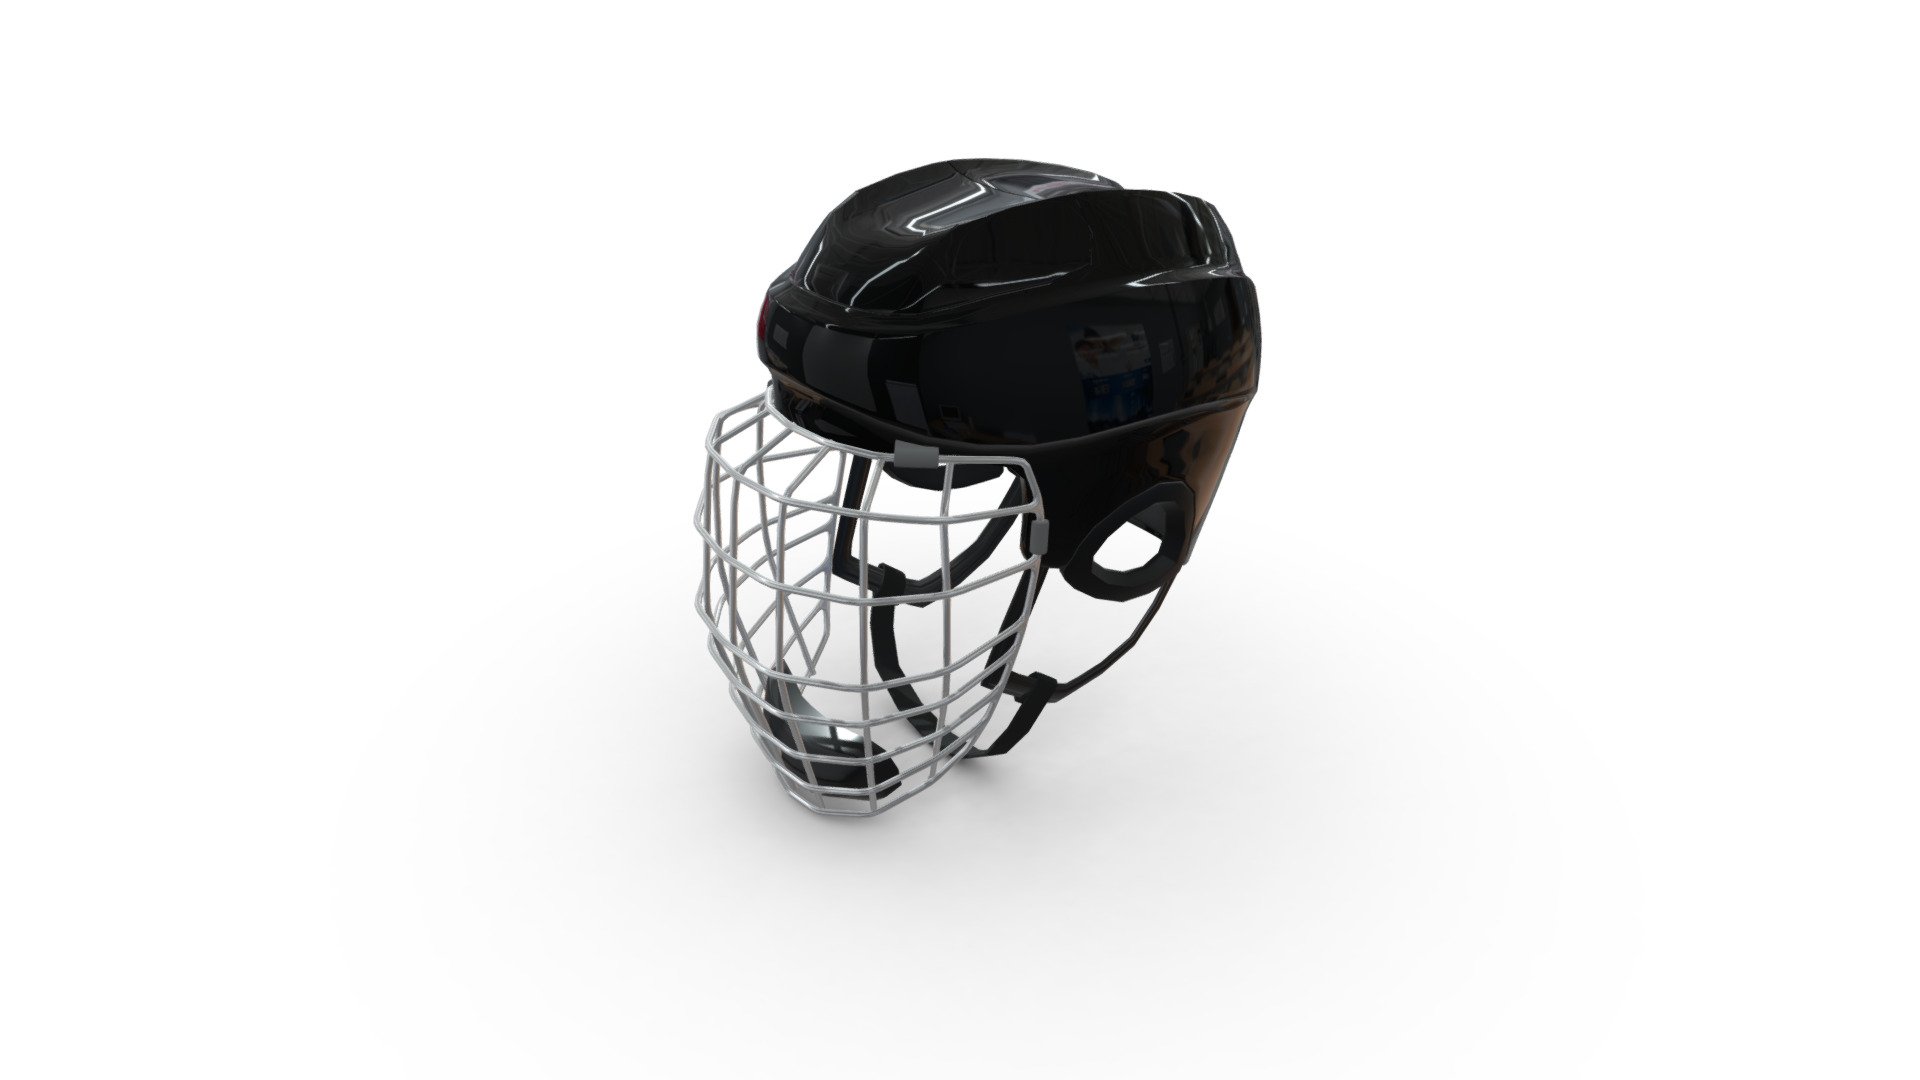 Introducing the Hockey Helmet 3D model, a high-quality and detailed representation of the essential protective gear worn by hockey players. This 3D model captures the robust construction and functional design of a standard hockey helmet, making it an ideal choice for sports visualizations, game assets, or product showcases.

The Hockey Helmet 3D model showcases the distinctive shape and features of a typical hockey helmet, including the protective padding, ventilation holes, and adjustable straps. With its realistic textures and materials, this 3D model offers an authentic representation that's perfect for enhancing the realism of your hockey-themed projects.

Download the Hockey Helmet 3D model today to elevate your sports-related projects with this essential piece of hockey equipment.


HockeyHelmet #SportsEquipment #3DModel #Hockey #SportsVisualization #GameAssets #ProtectiveGear #SportsSimulation #PromotionalMaterials #Athletics - Hockey Helmet - Buy Royalty Free 3D model by Sujit Mishra (@sujitanshumishra) 3d model